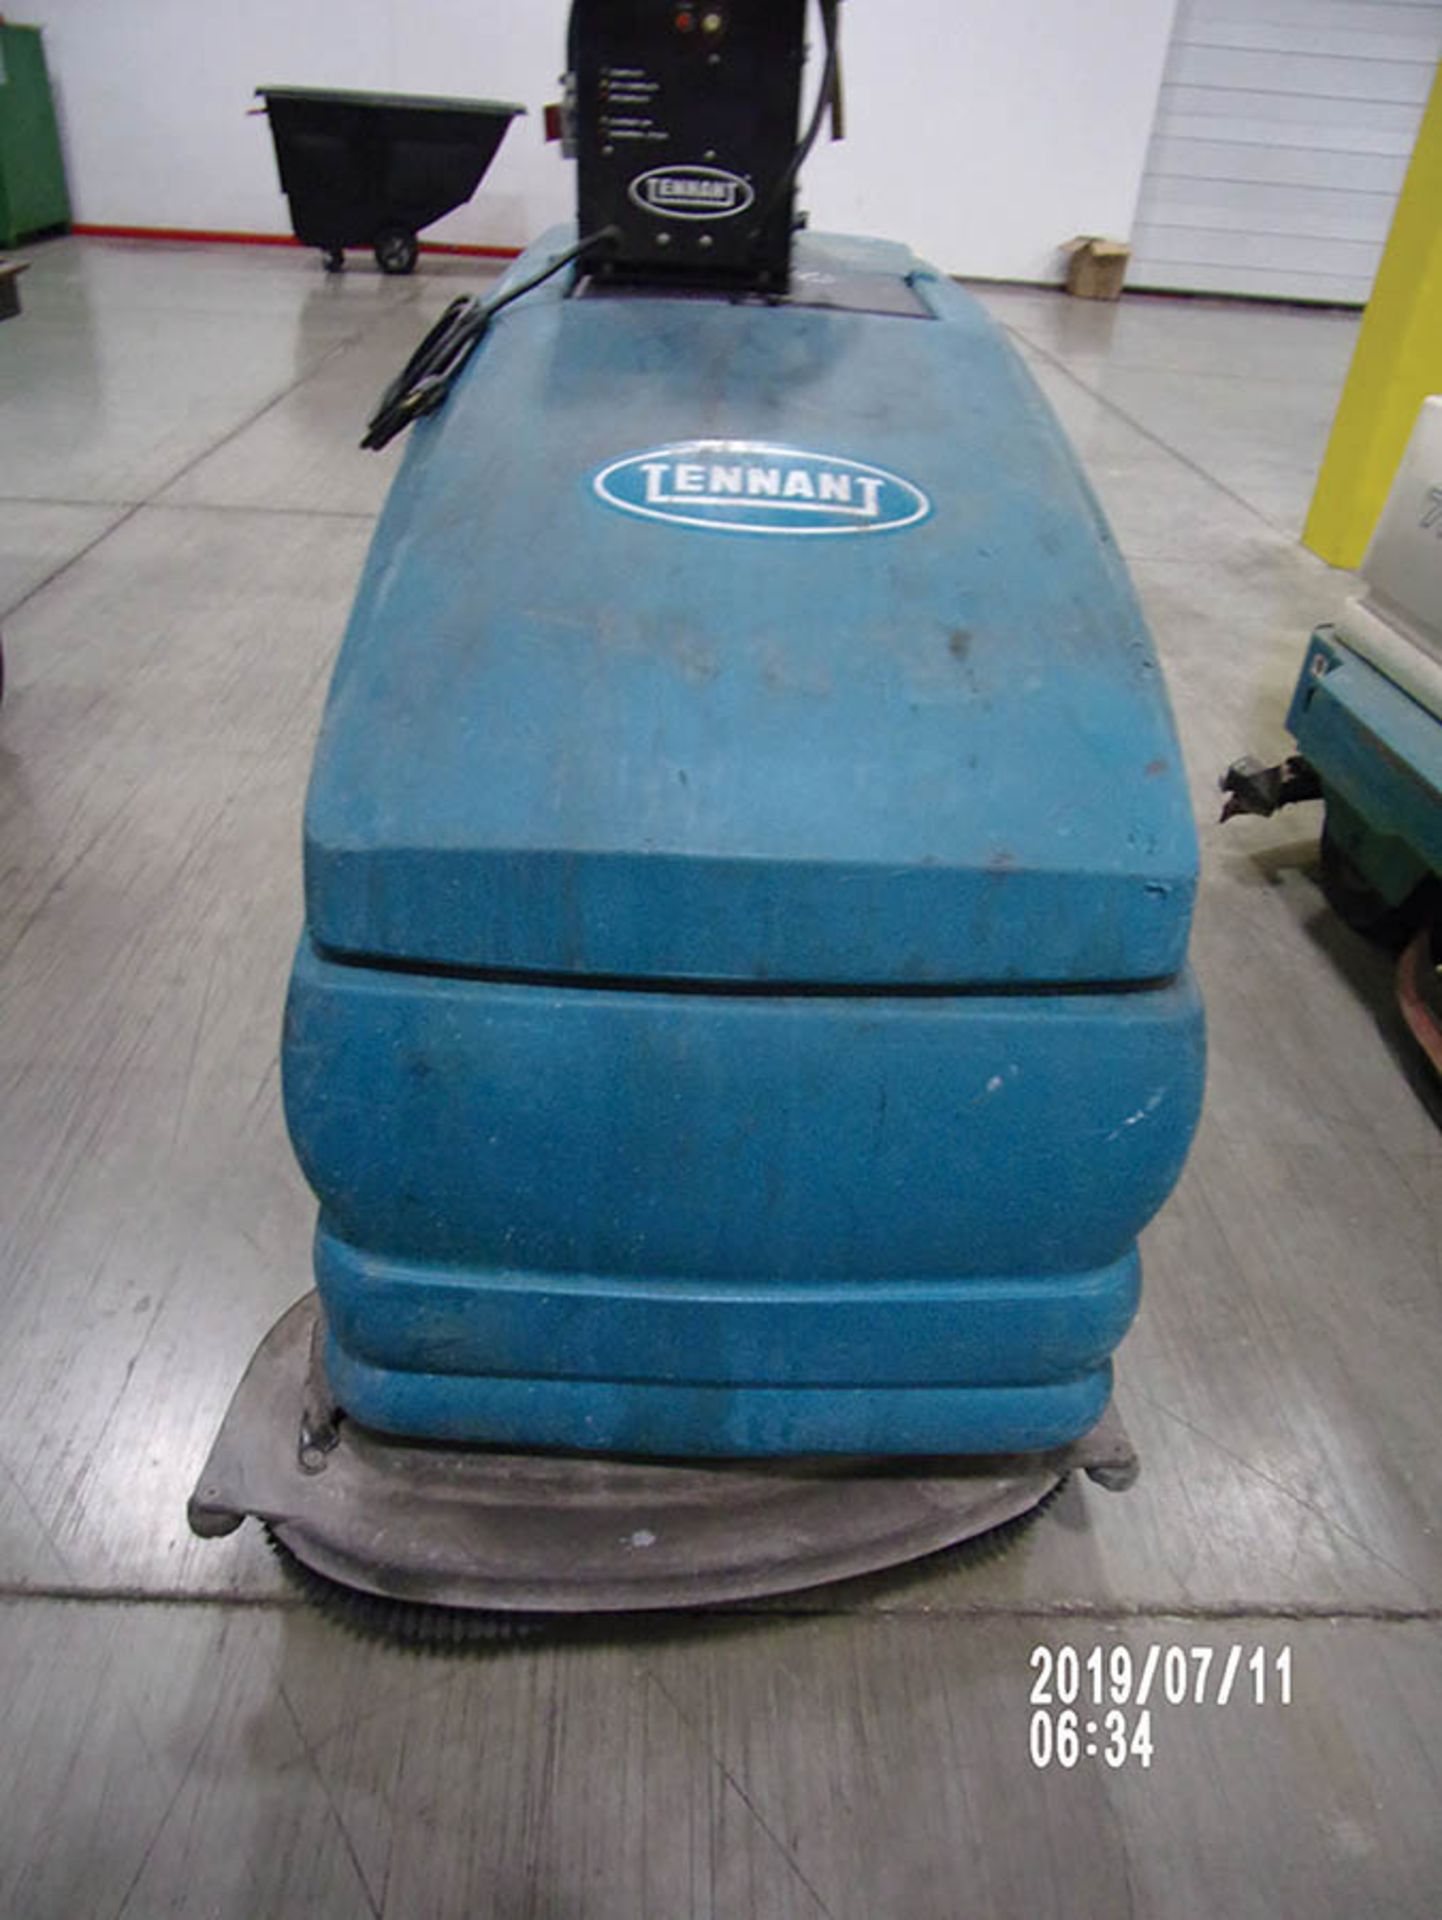 TENNANT FLOOR SWEEPER WITH CHARGER, S/N 3560 - Image 8 of 8